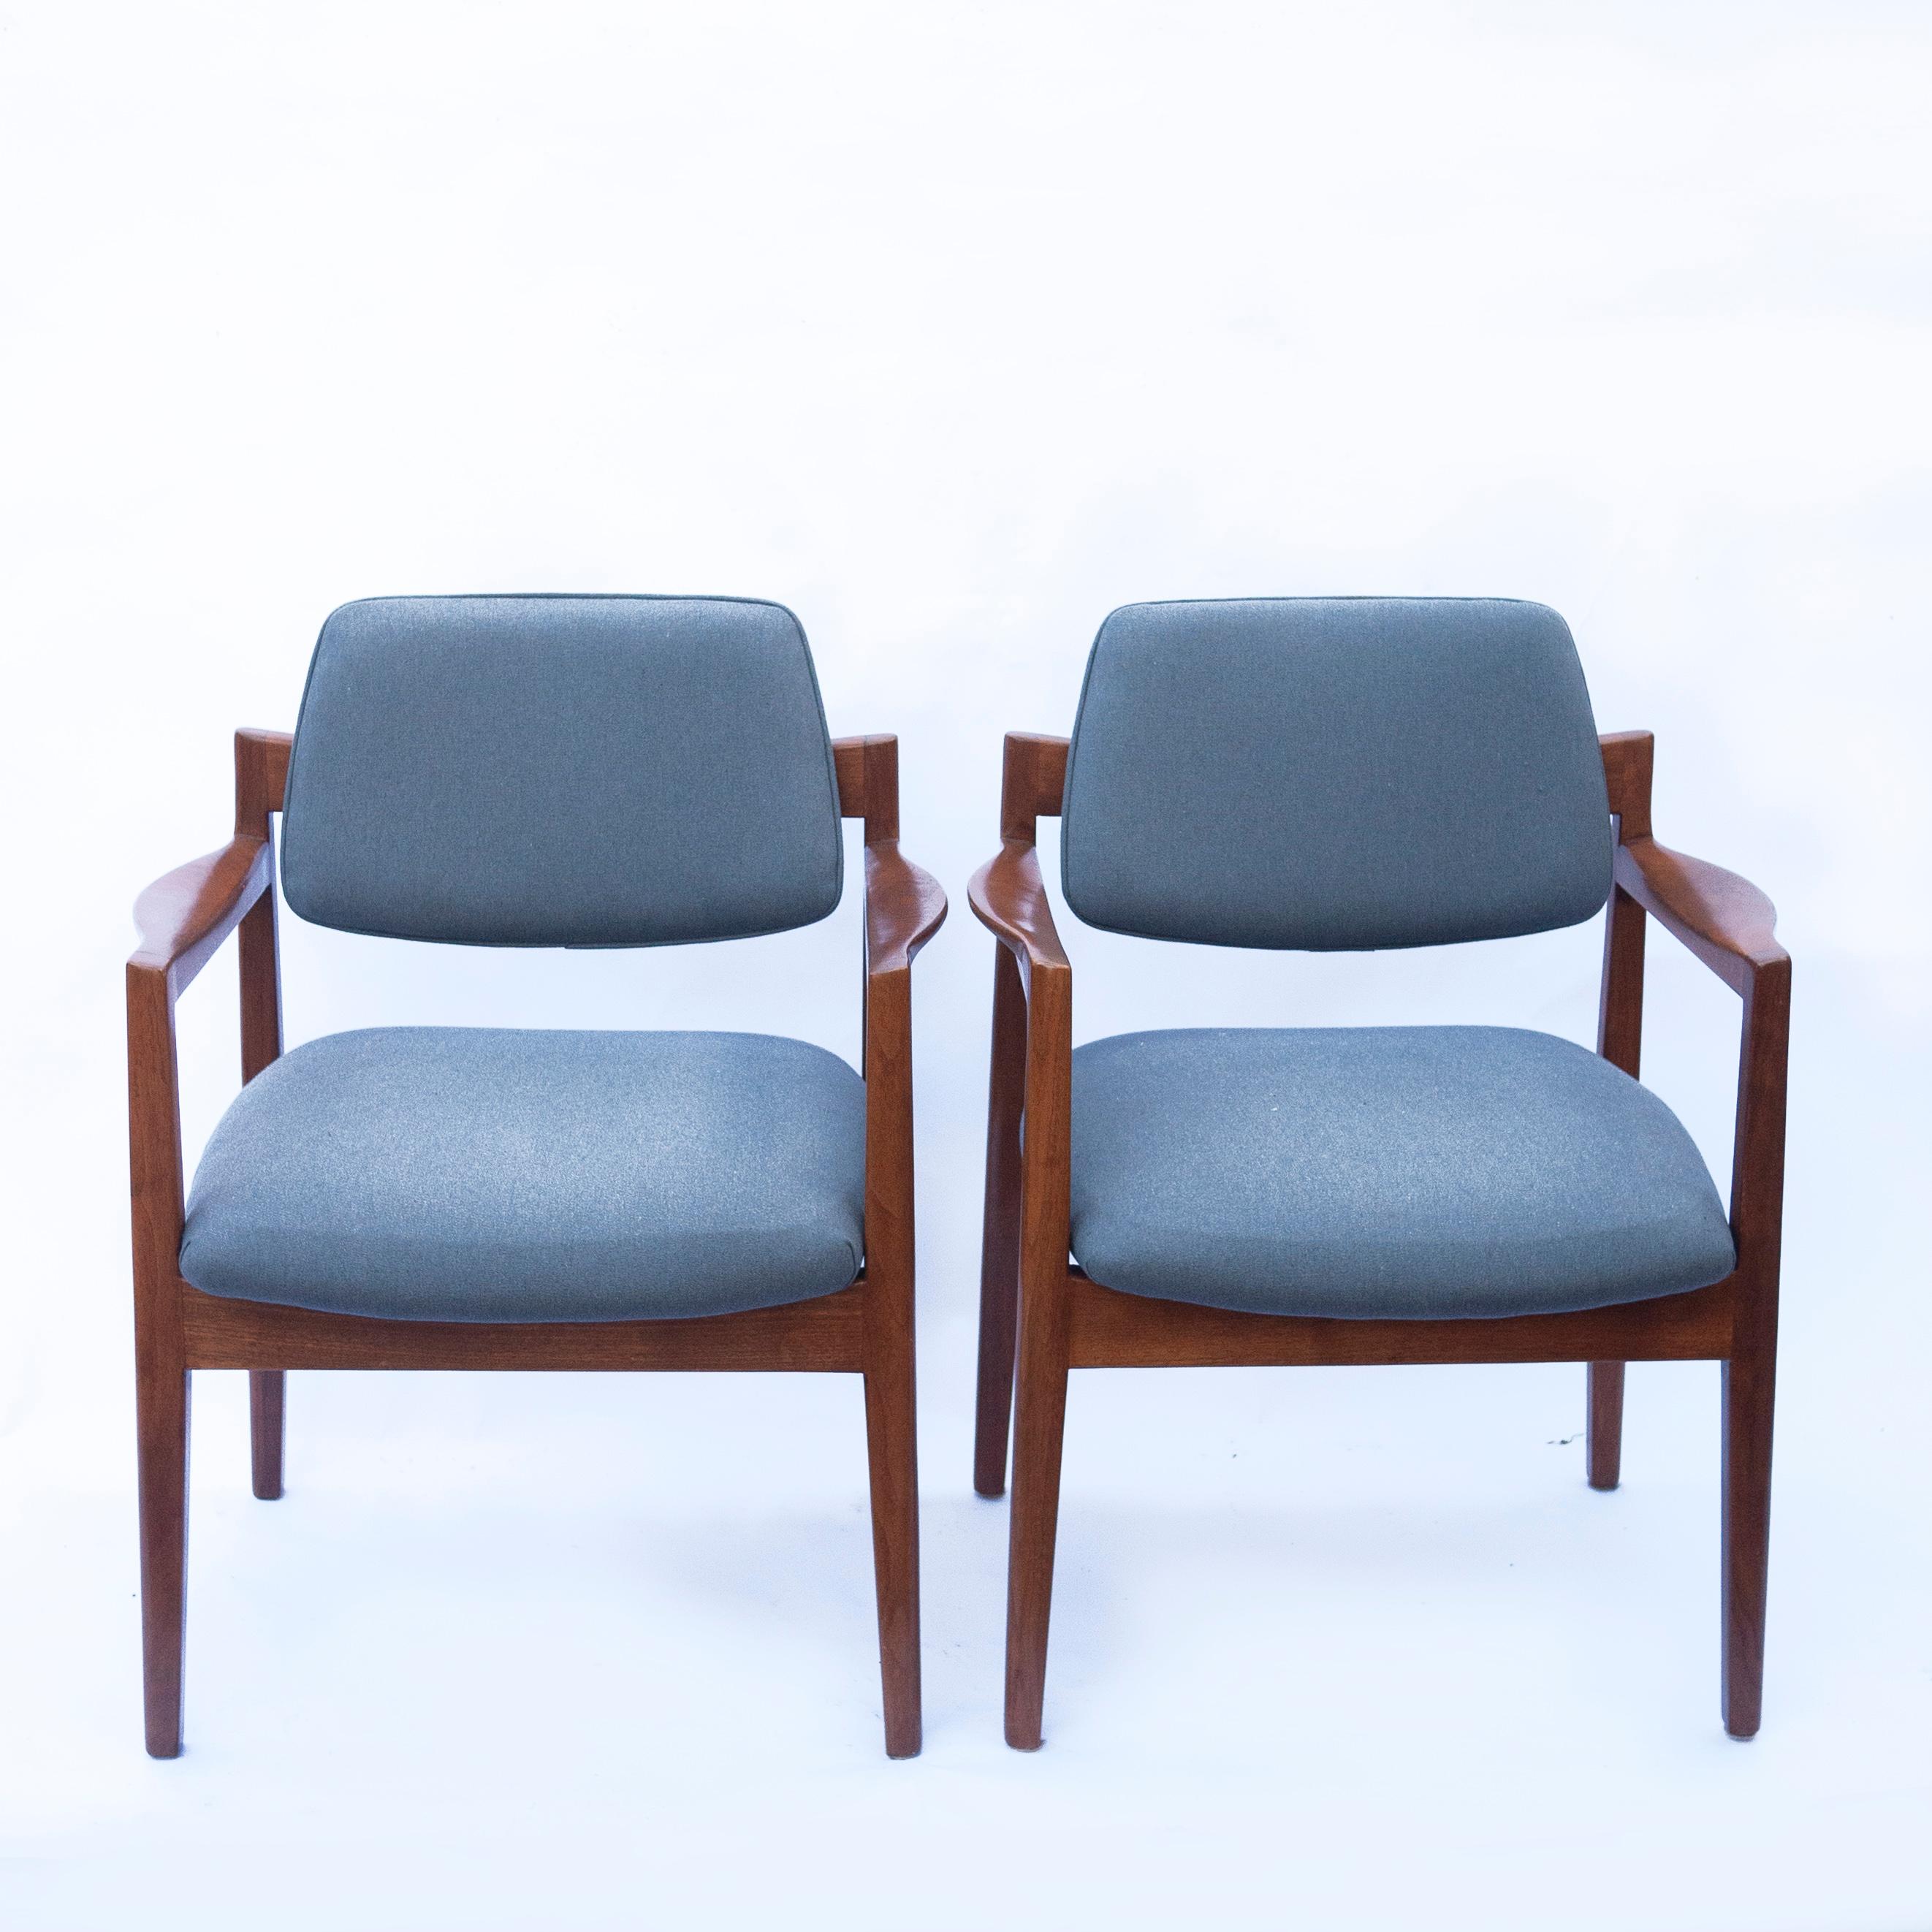 A pair Jens Risom armchairs in a newly upholstered blue coloured fabric. The frame is made from walnut.

Manufacturer - Knoll

Designer - Jens Risom

Design Period - 1960 to 1969

Style - Vintage, midcentury

Detailed condition -